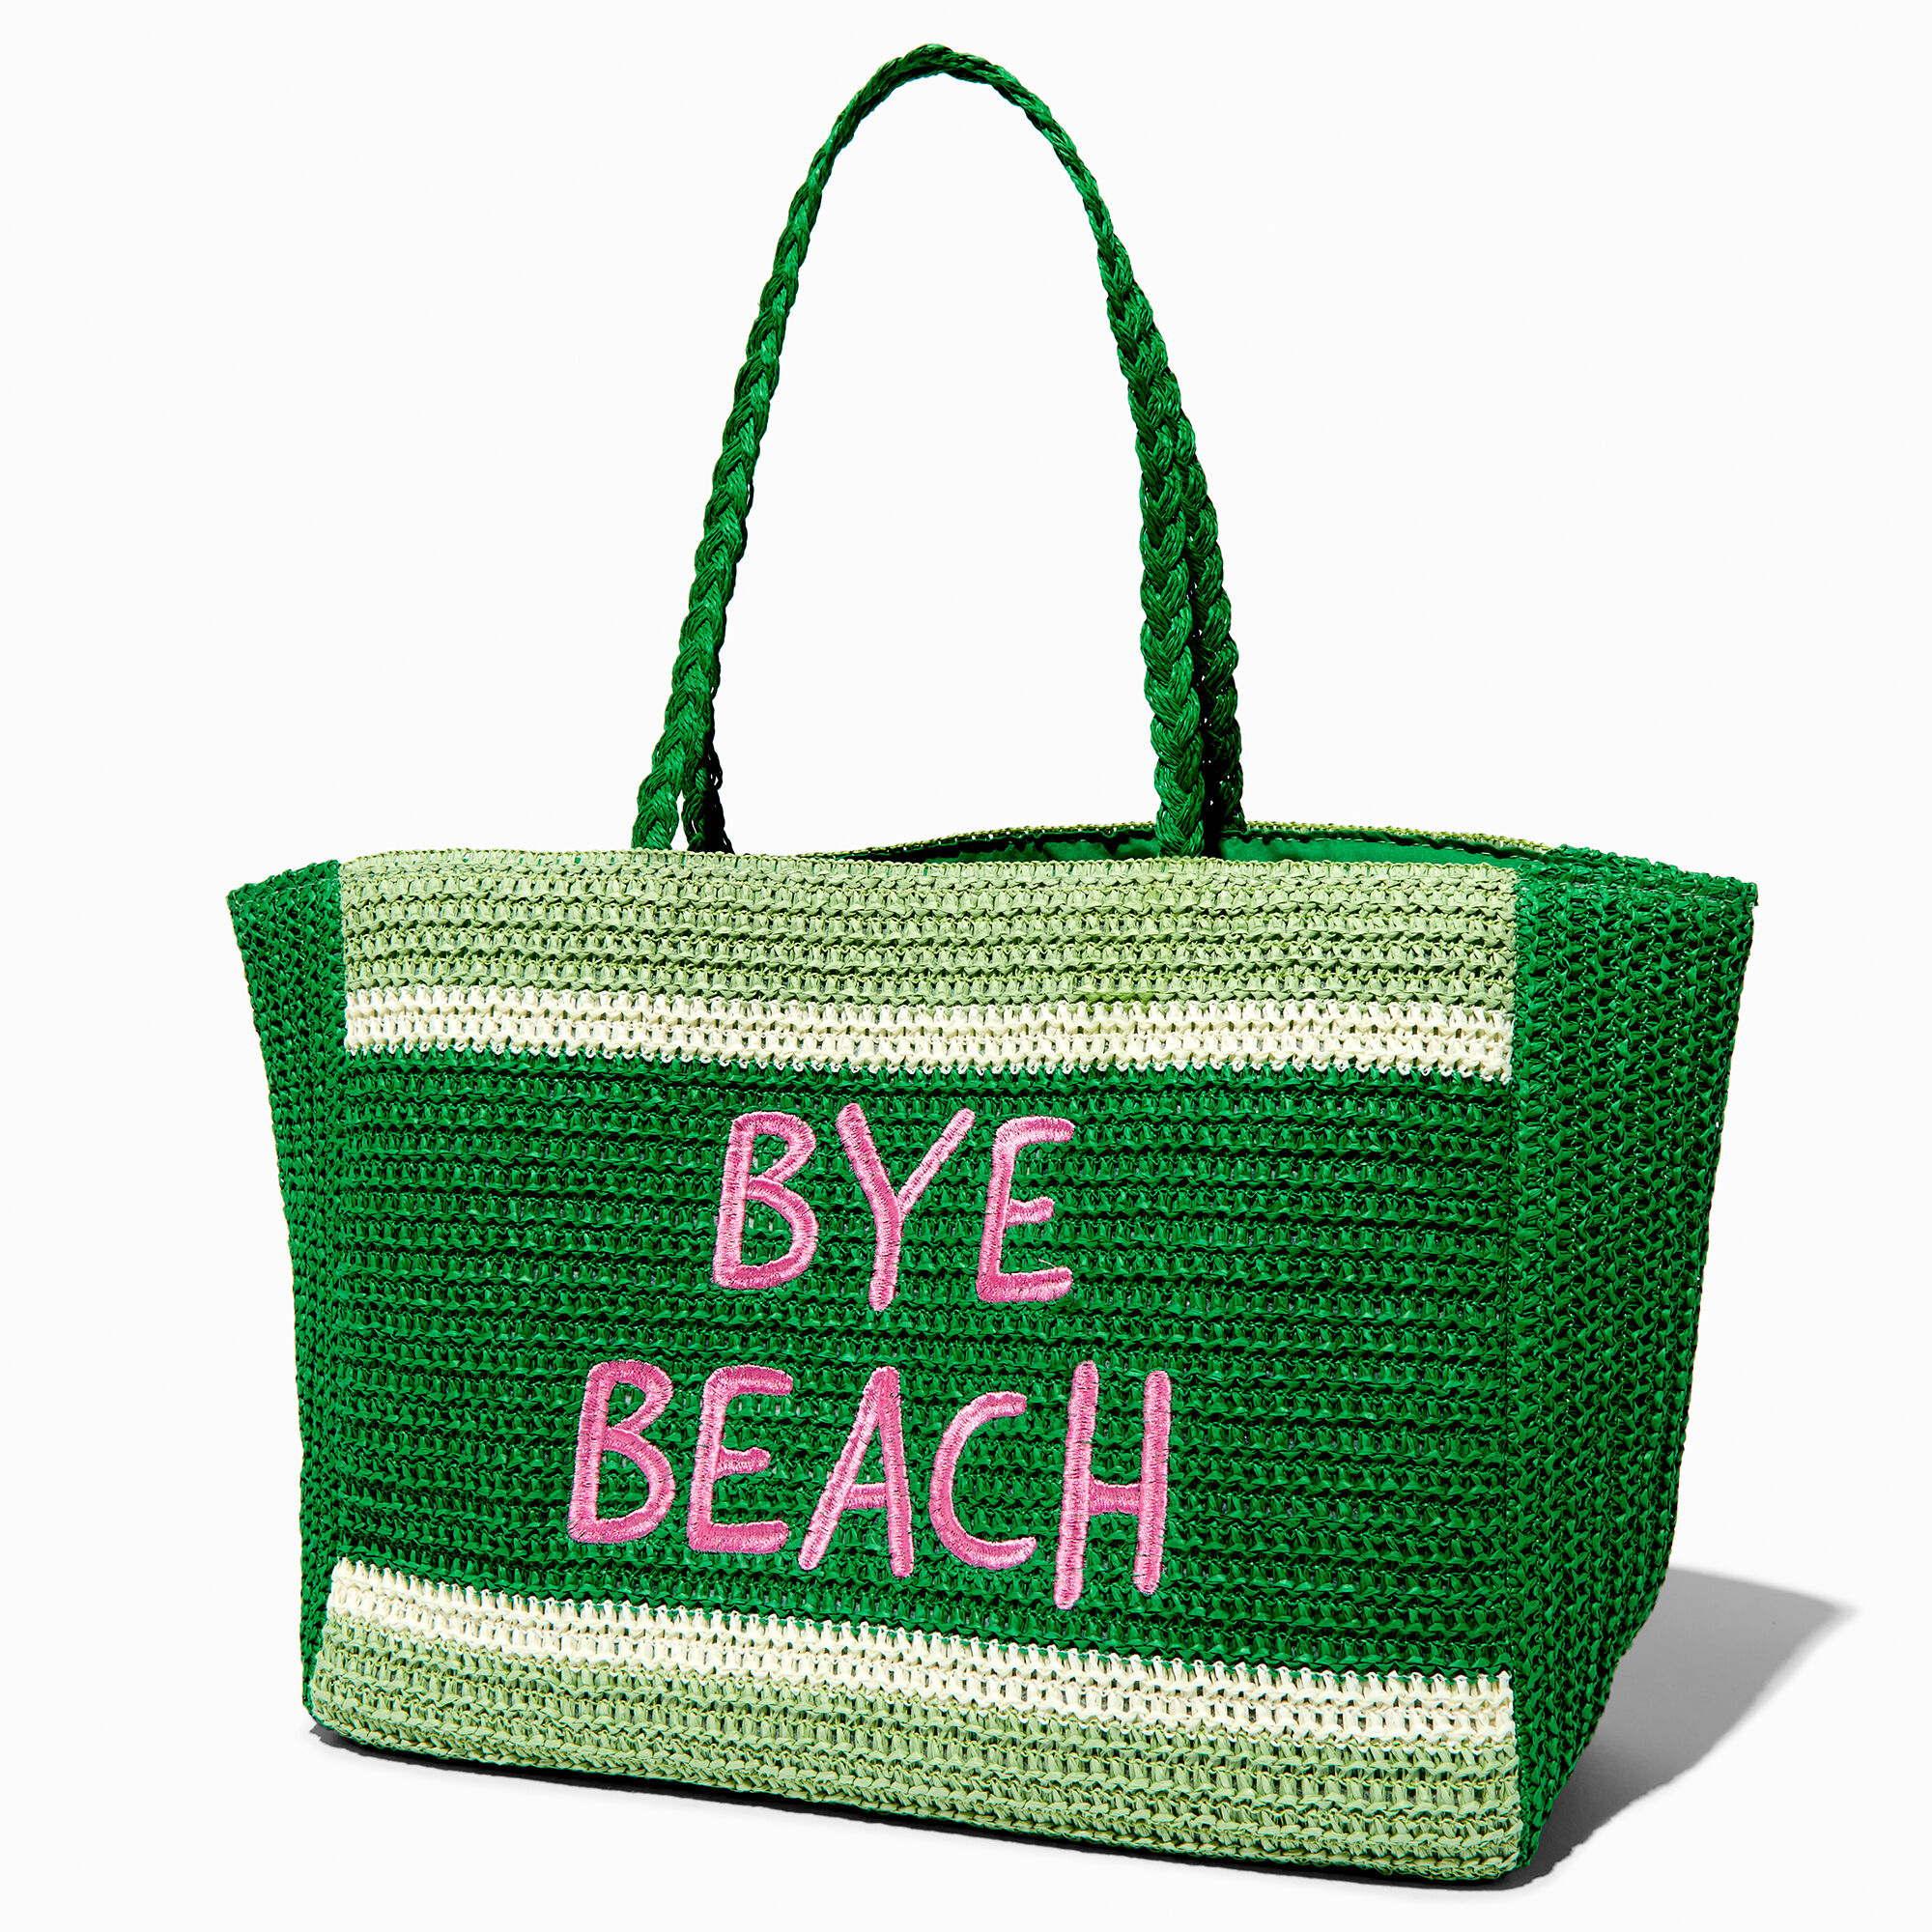 View Claires bye Beach Large Woven Tote Bag information